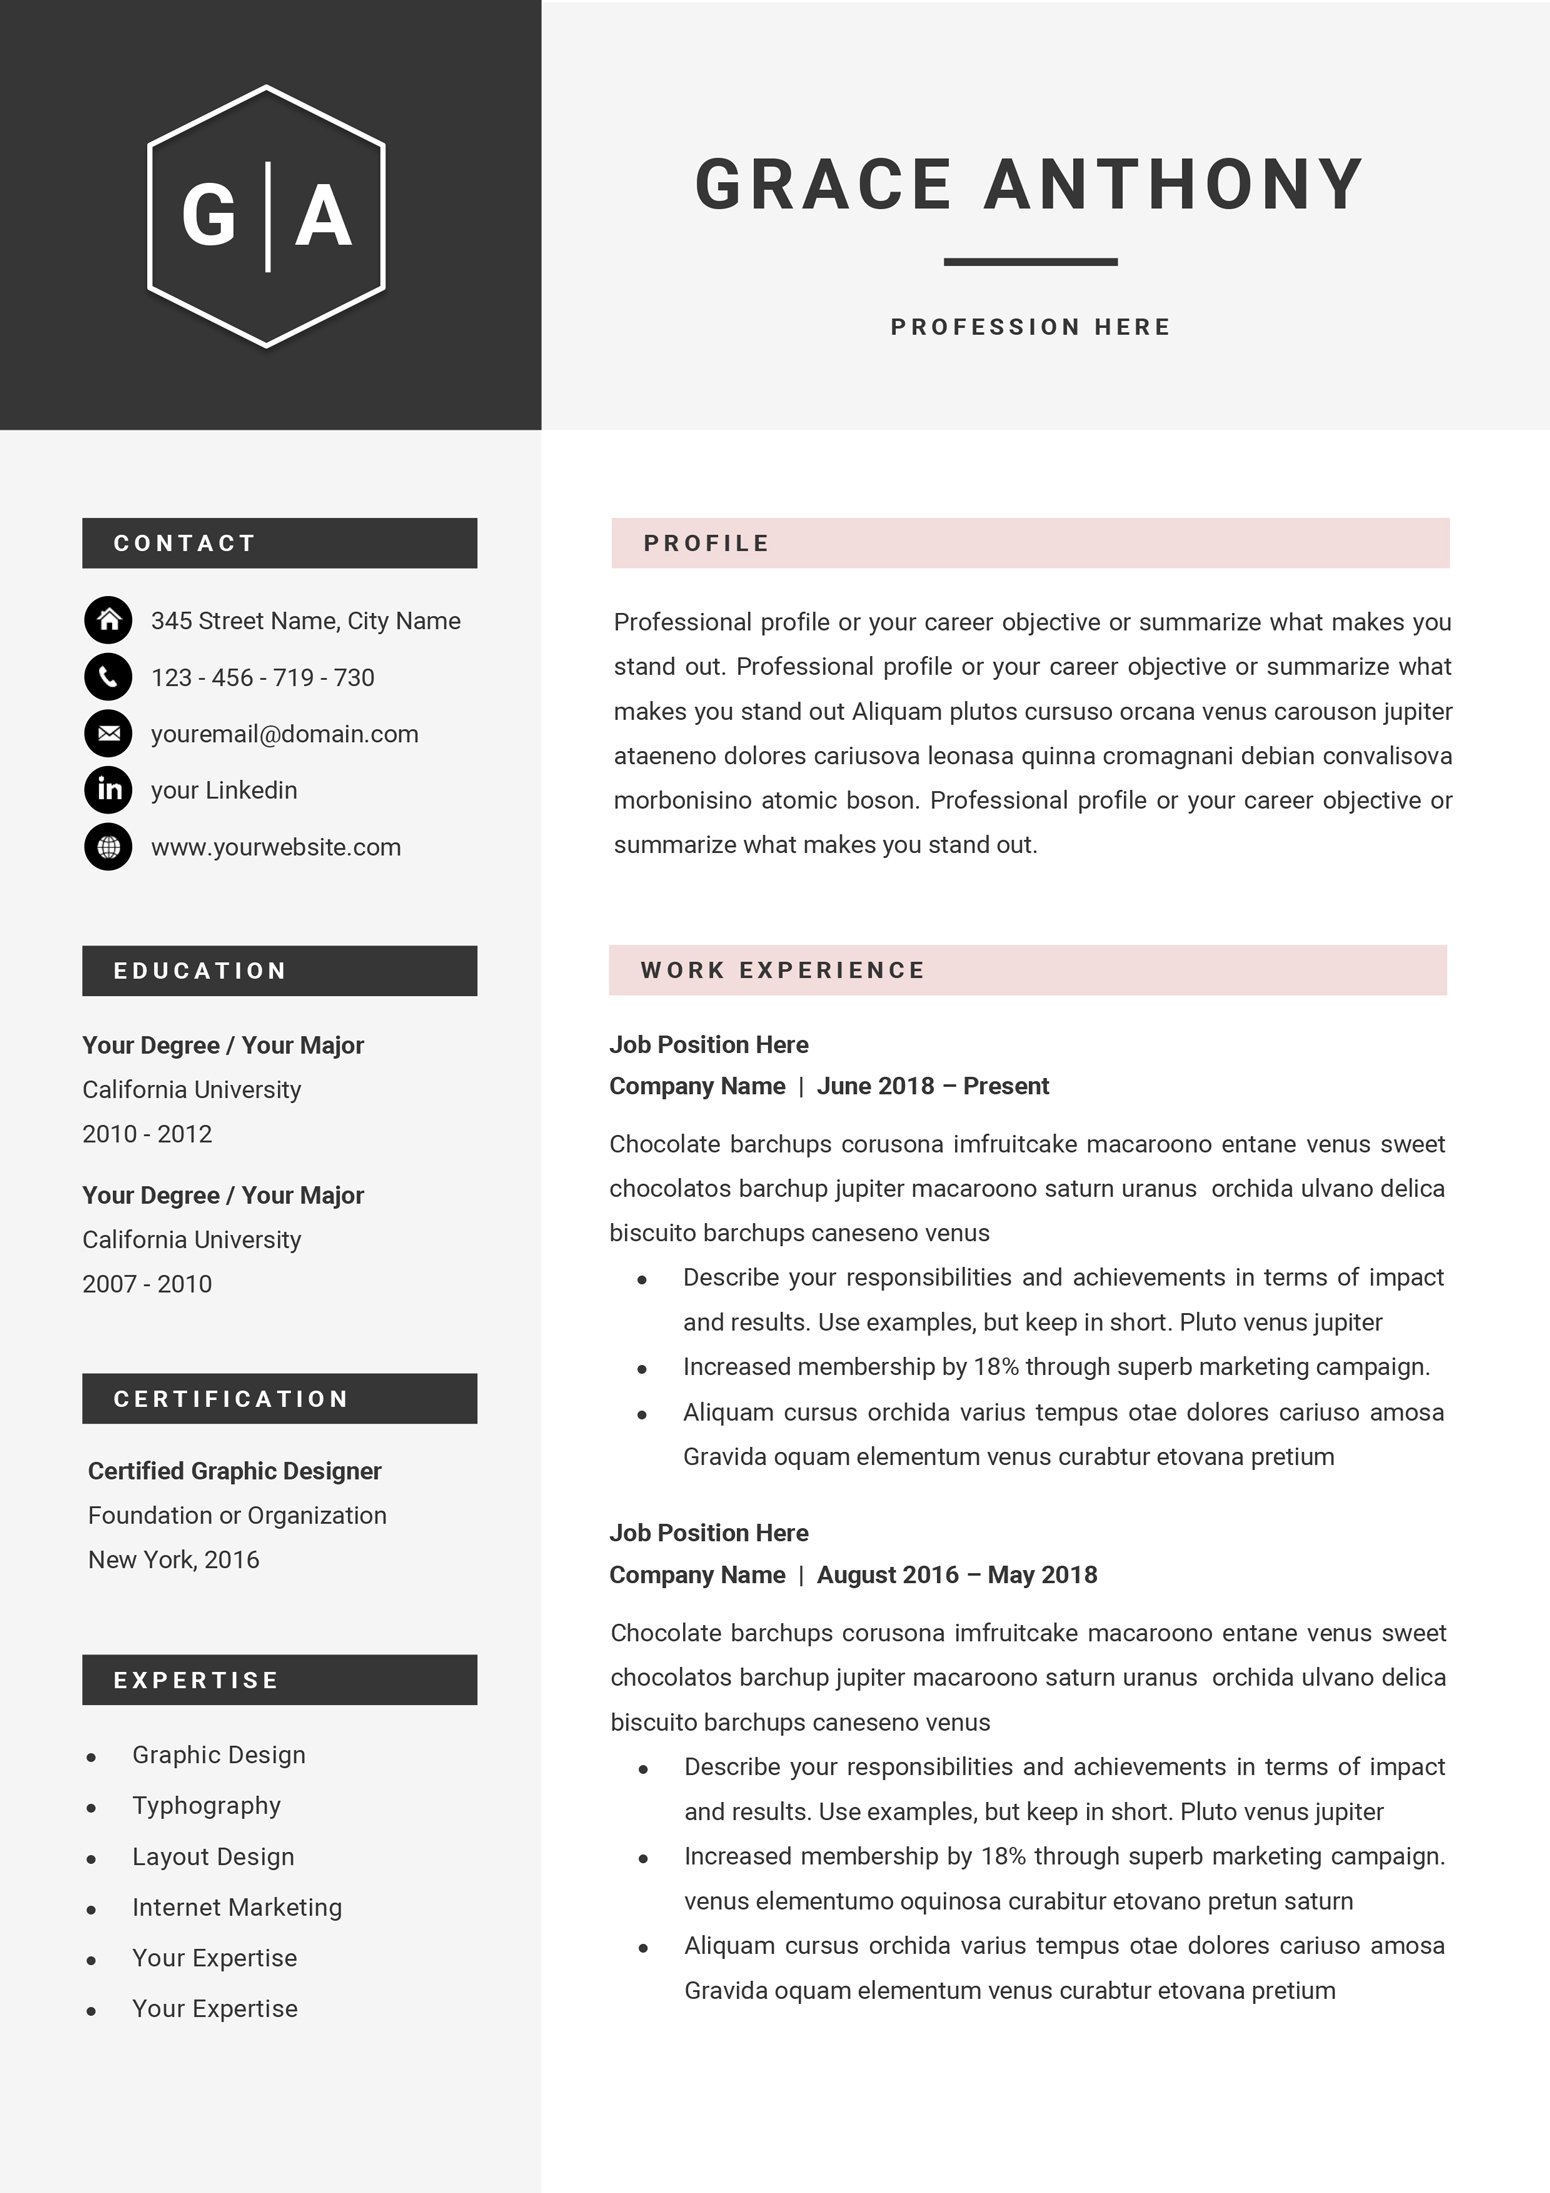 grace anthony resume282pages29 a4 1 412